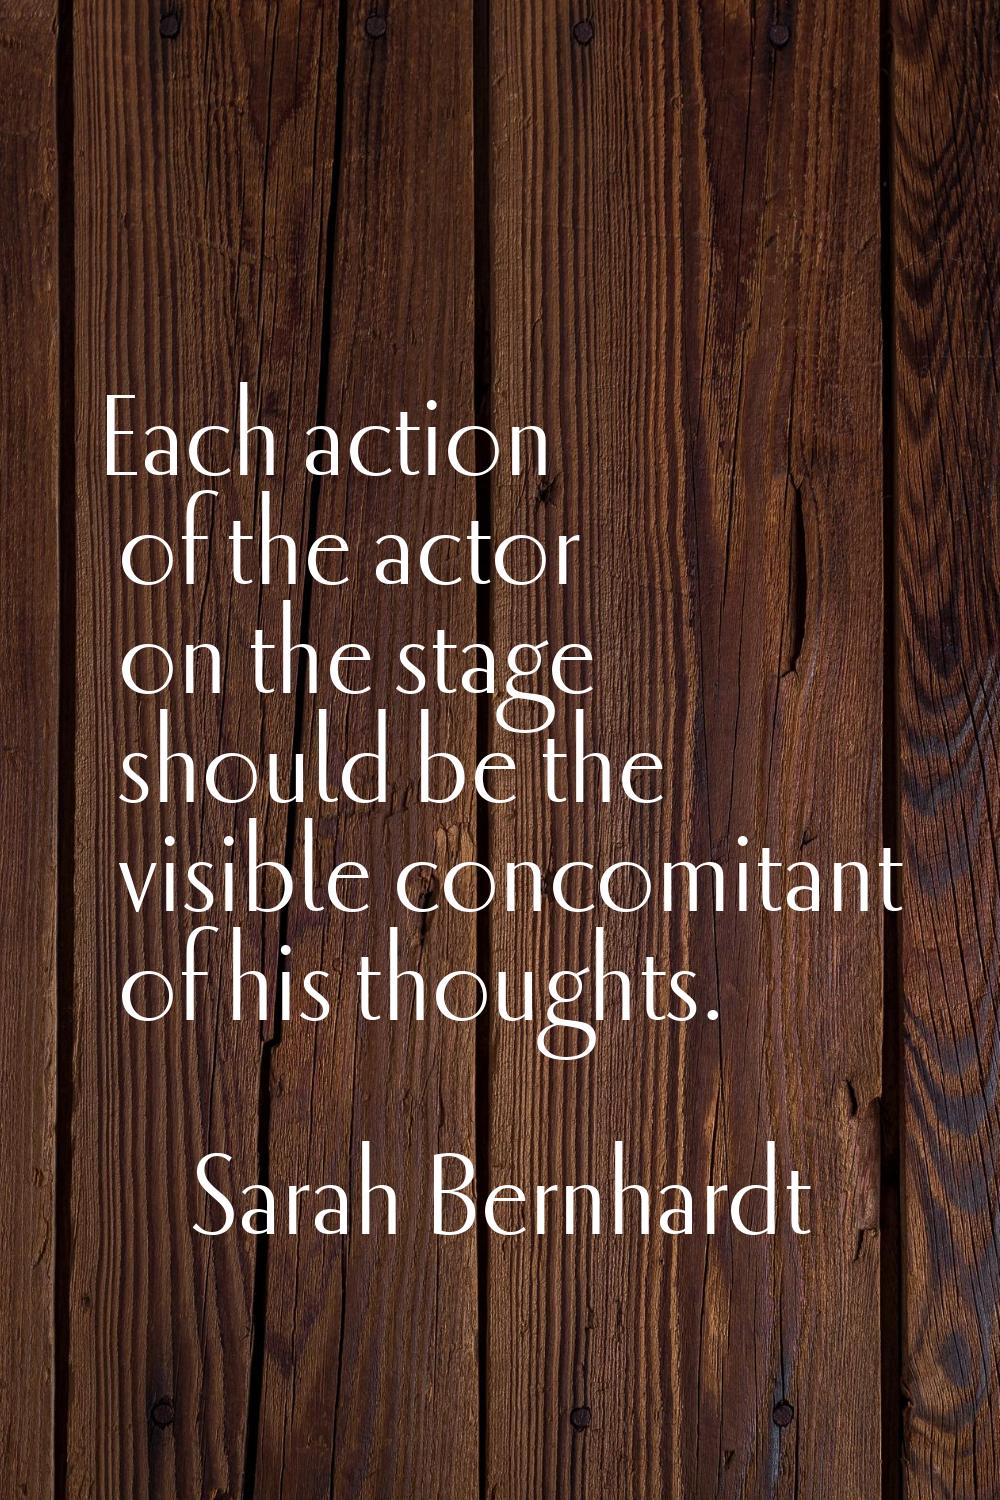 Each action of the actor on the stage should be the visible concomitant of his thoughts.